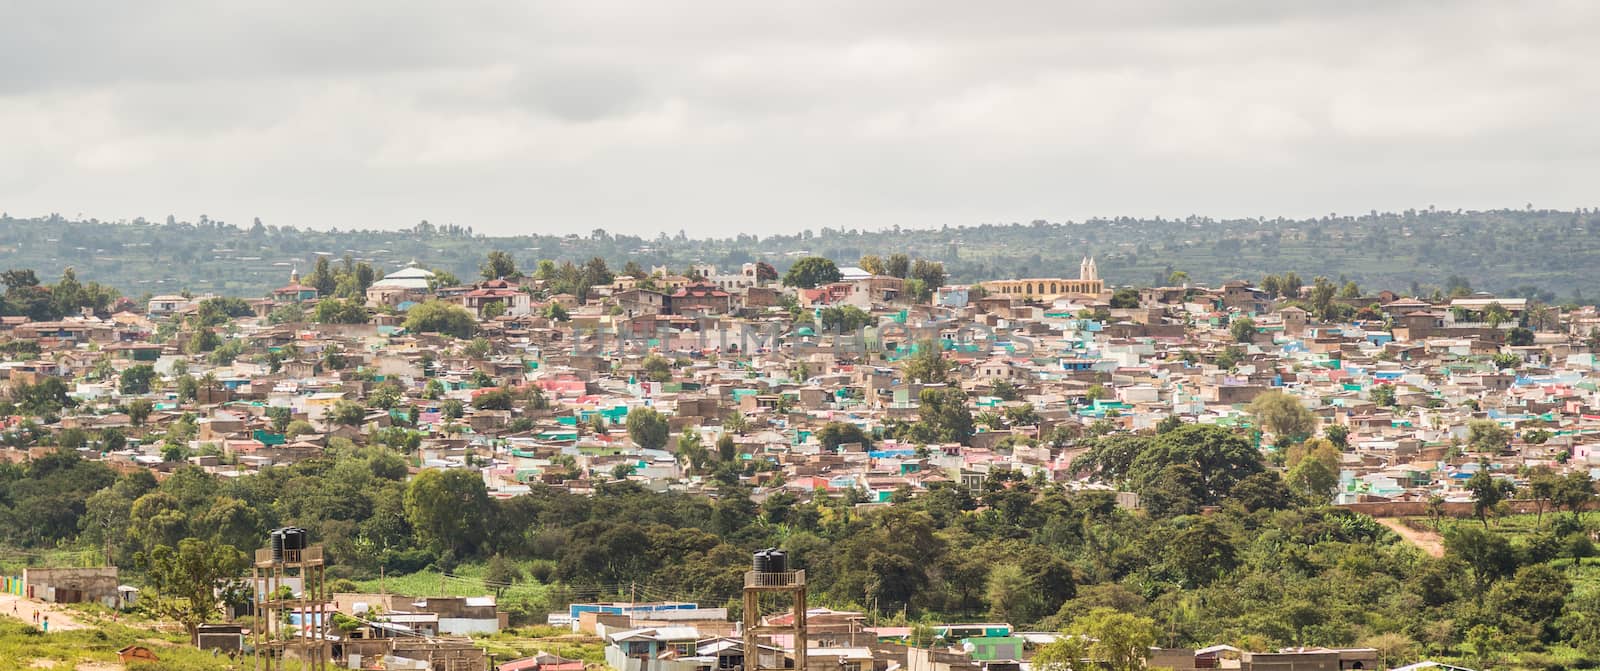 Aerial view of the city of Harar by derejeb